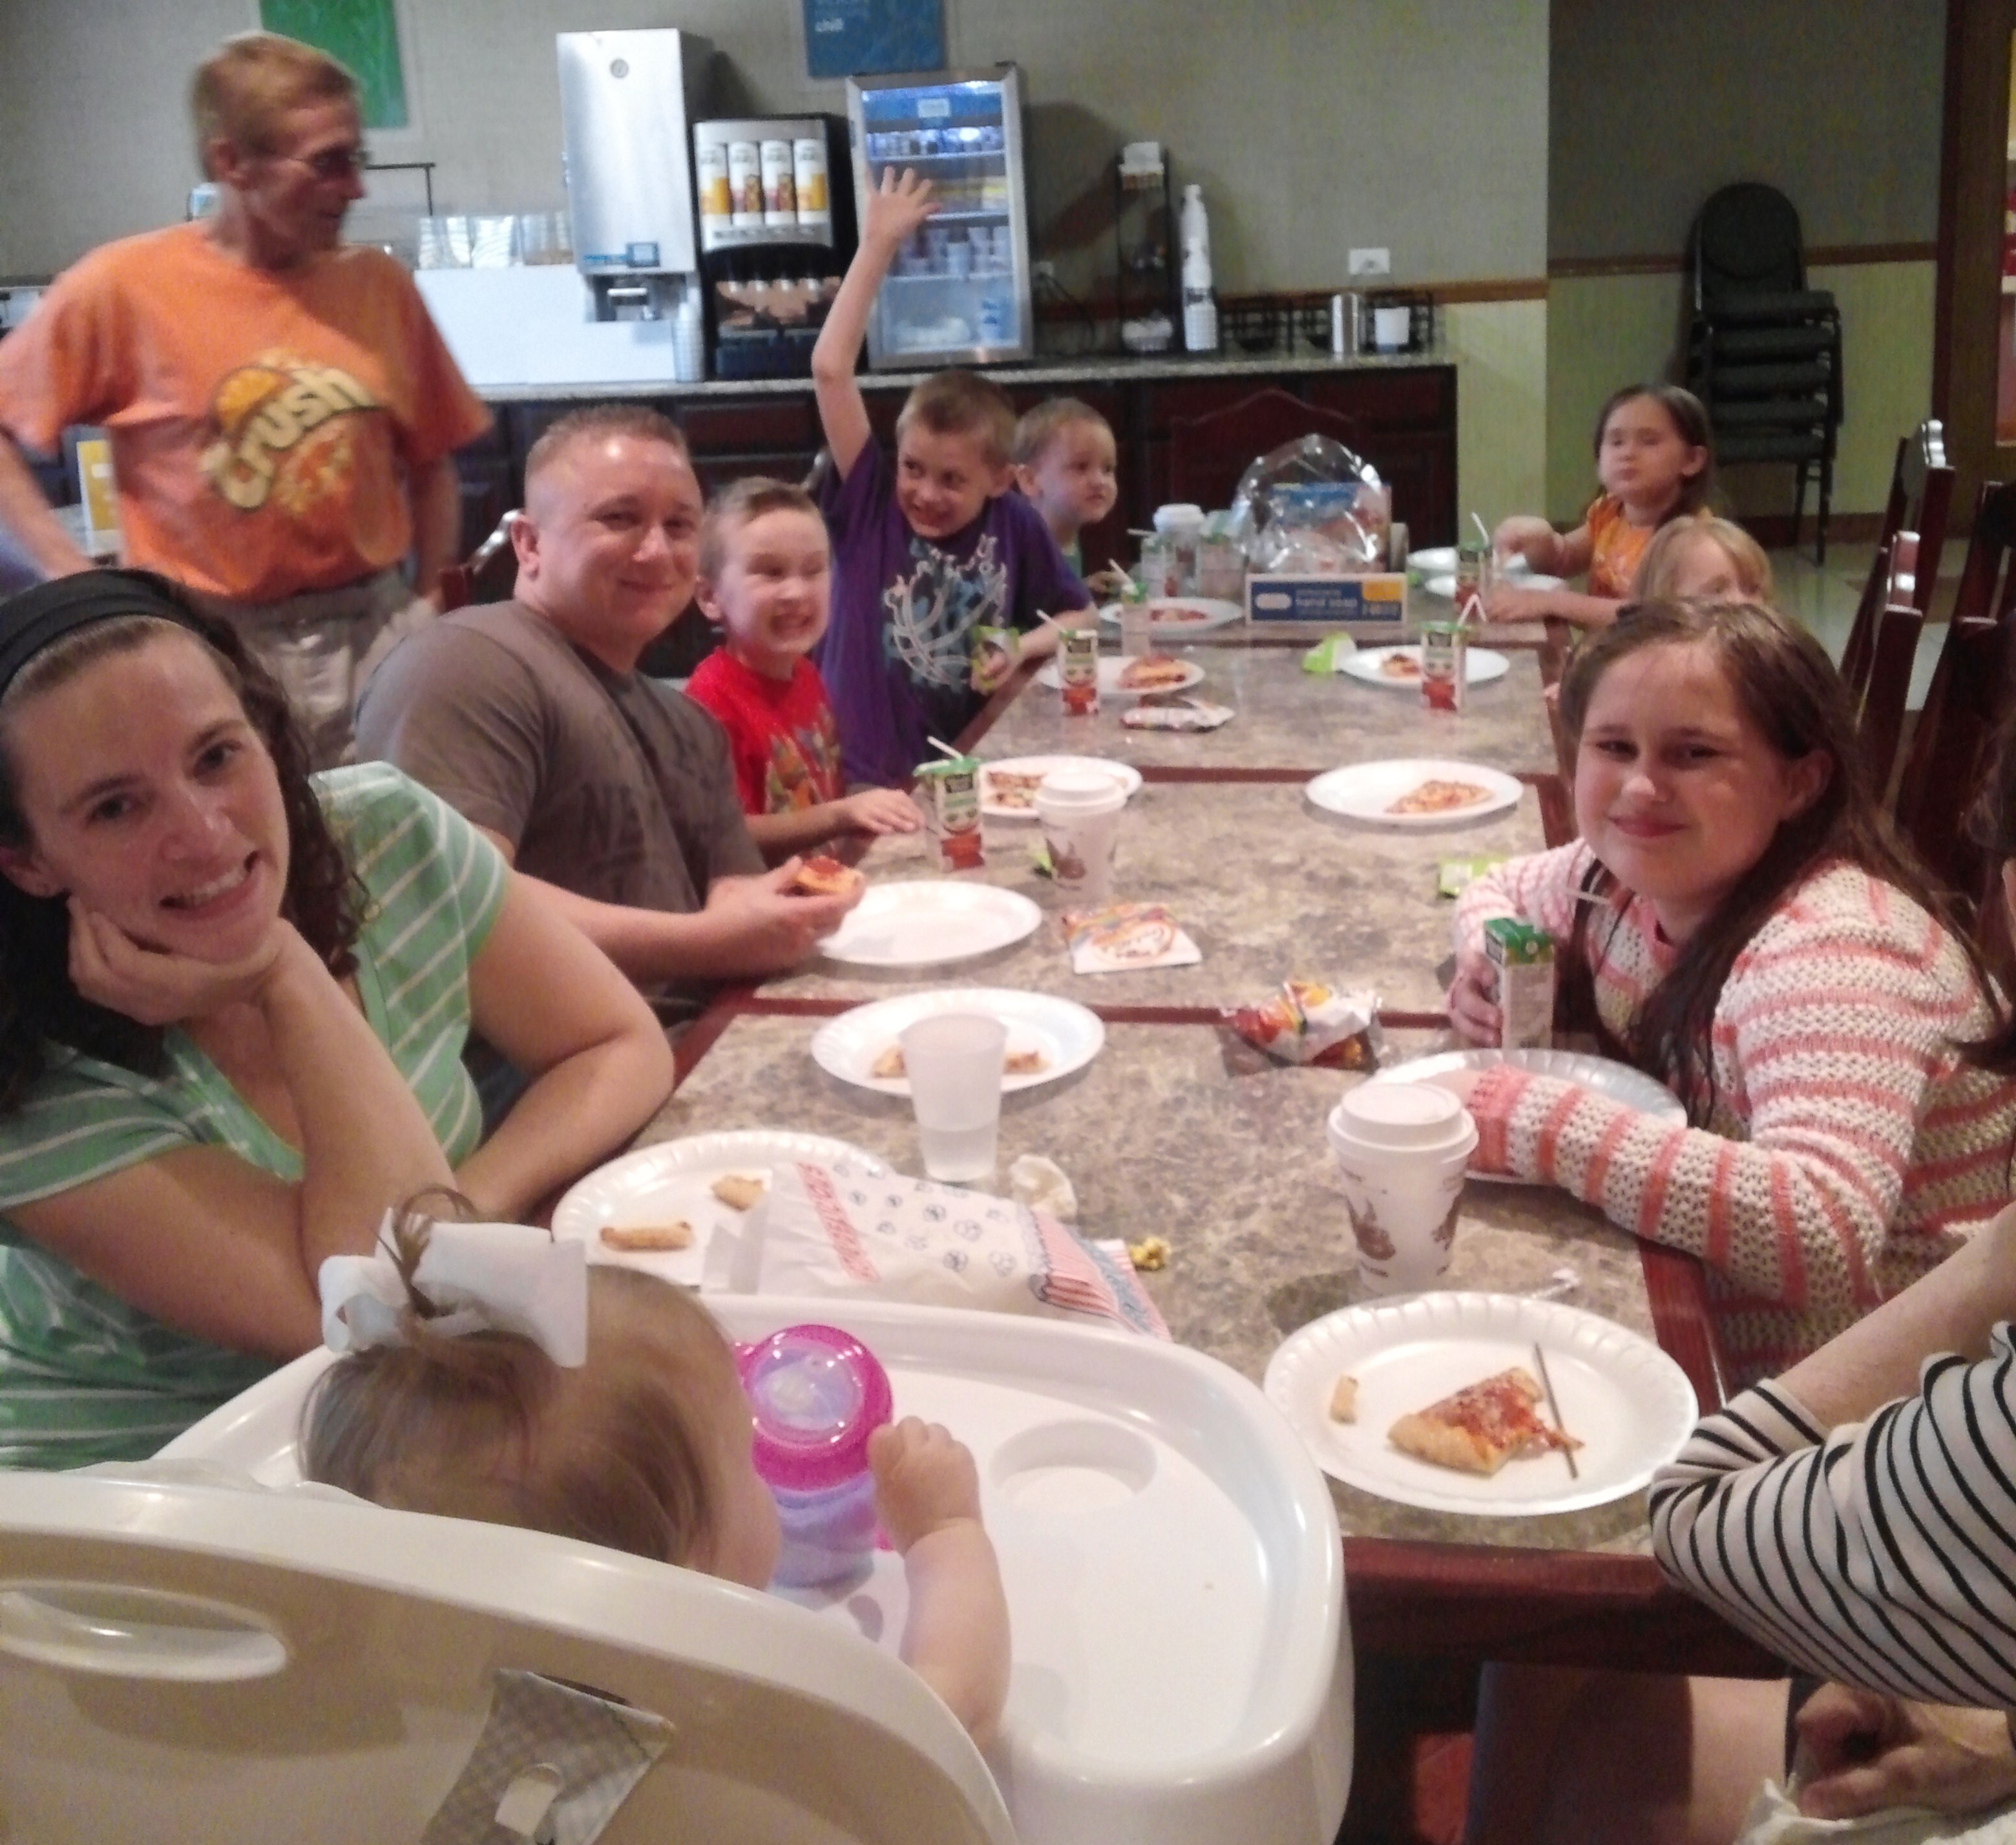 Faith and Family ReviewsMom's Night Out Papa Murphy's Pizza Party & Movie! - Faith and ...3120 x 2855